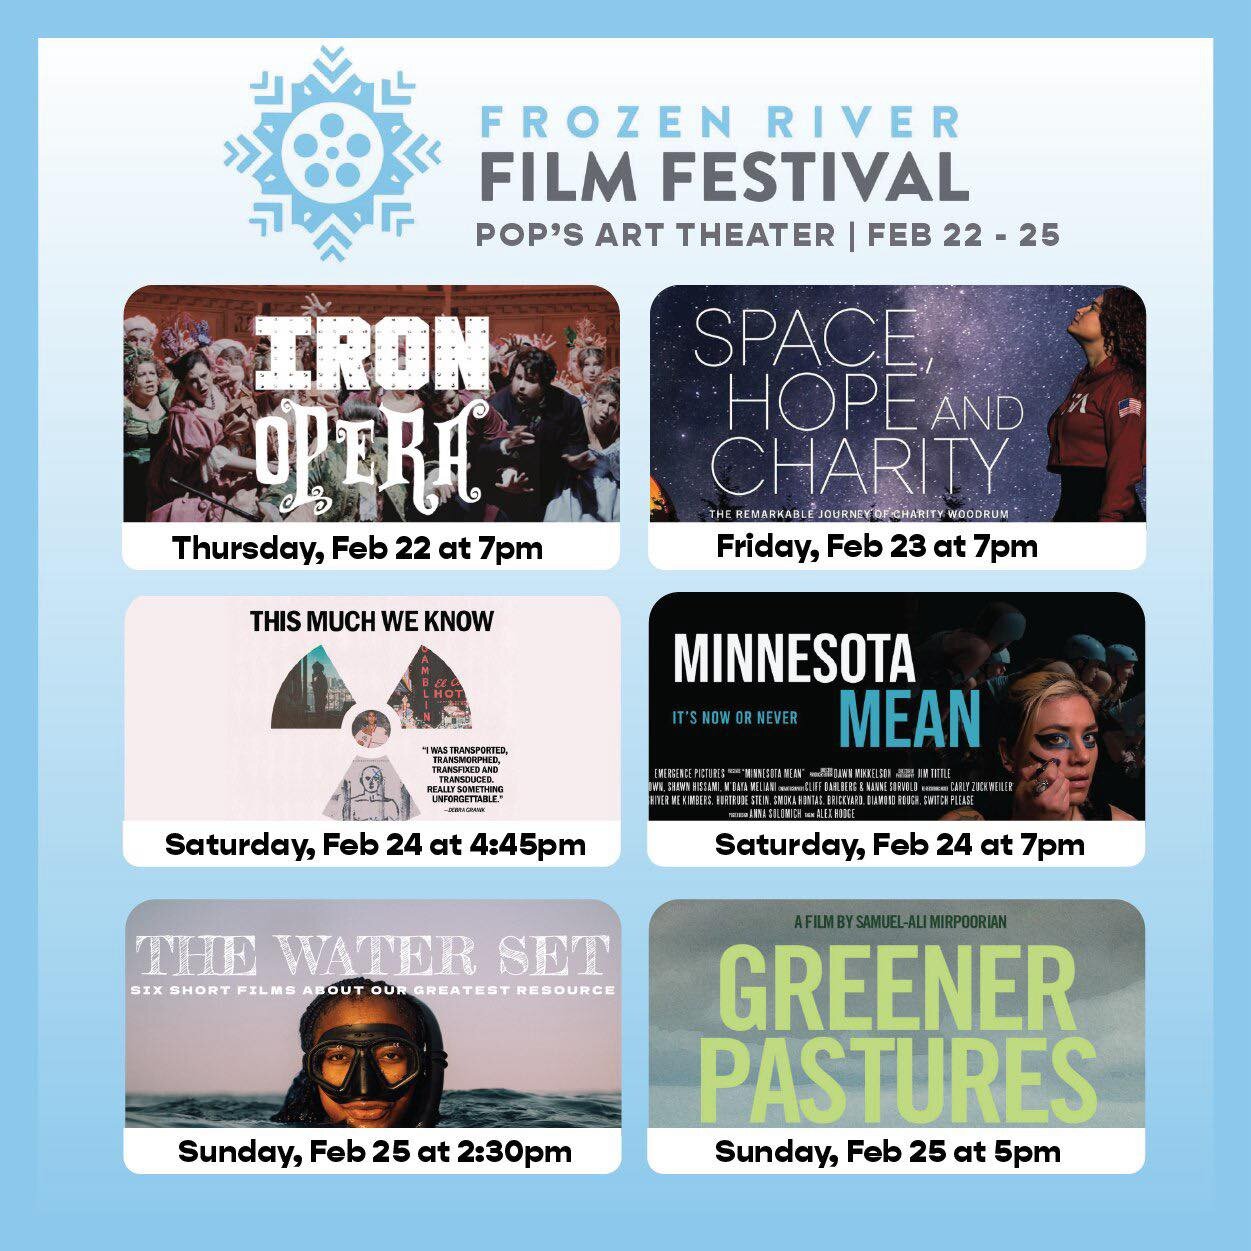 Frozen River Film Festival continues this weekend in Rochester at Pop's Art Theater: 

❄️ SPACE, HOPE AND CHARITY Fri 2/23 at 7pm
❄️ THIS MUCH WE KNOW Sat 2/24 at 4:45pm
❄️ MINNESOTA MEAN Sat 2/24 at 7pm
❄️ THE WATER SET Sun 2/25 at 2:30pm
❄️ GREENER